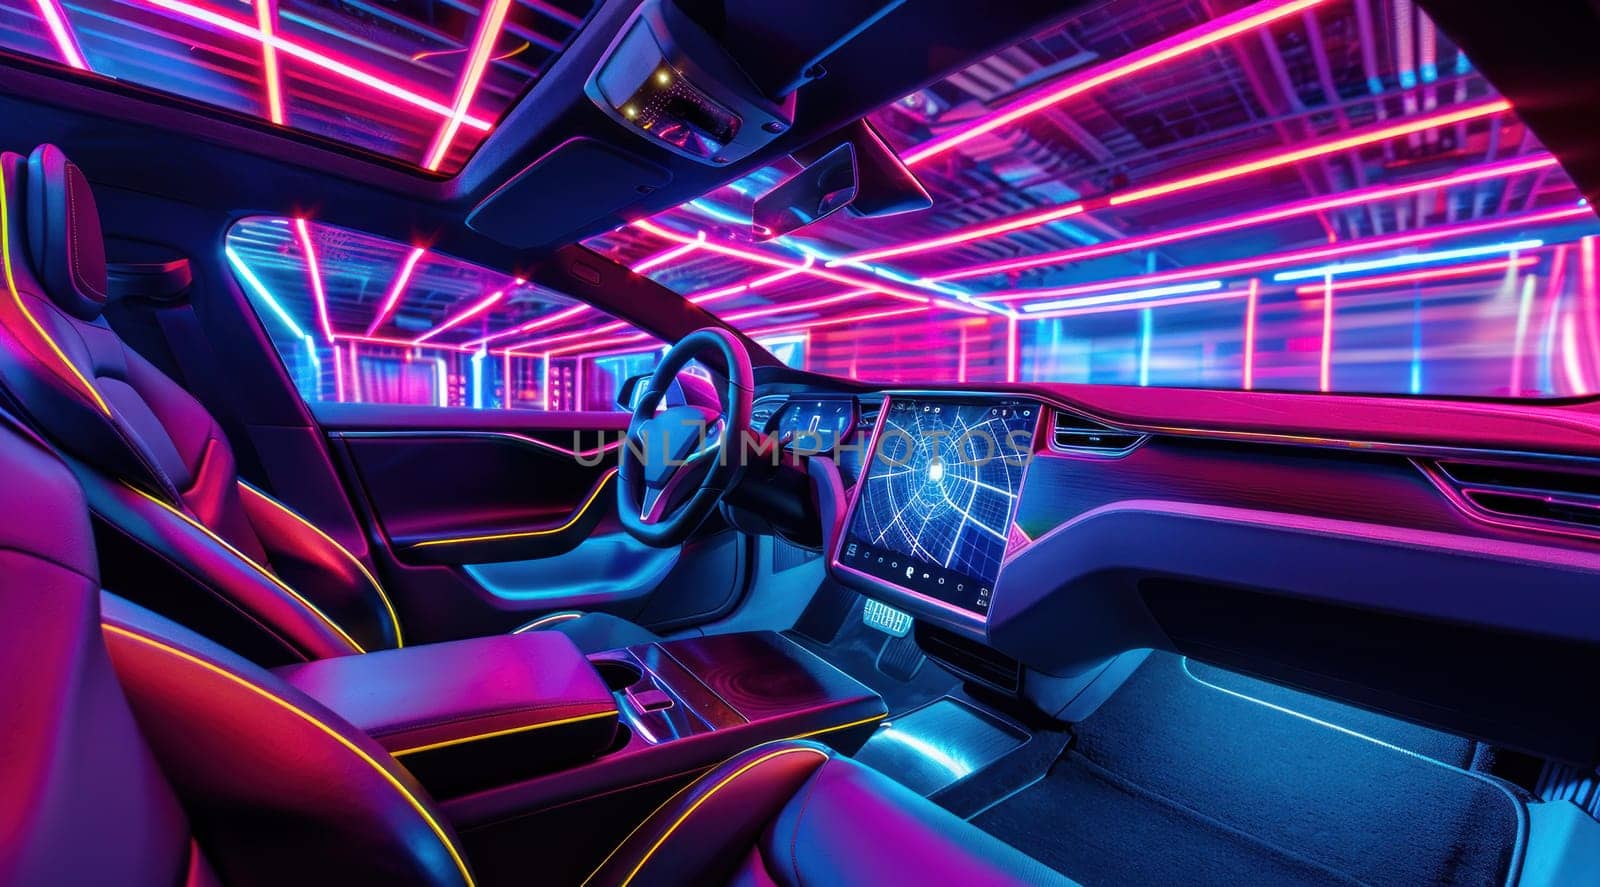 Vibrant interior of an electric car with a holographic touchscreen and neon lighting.